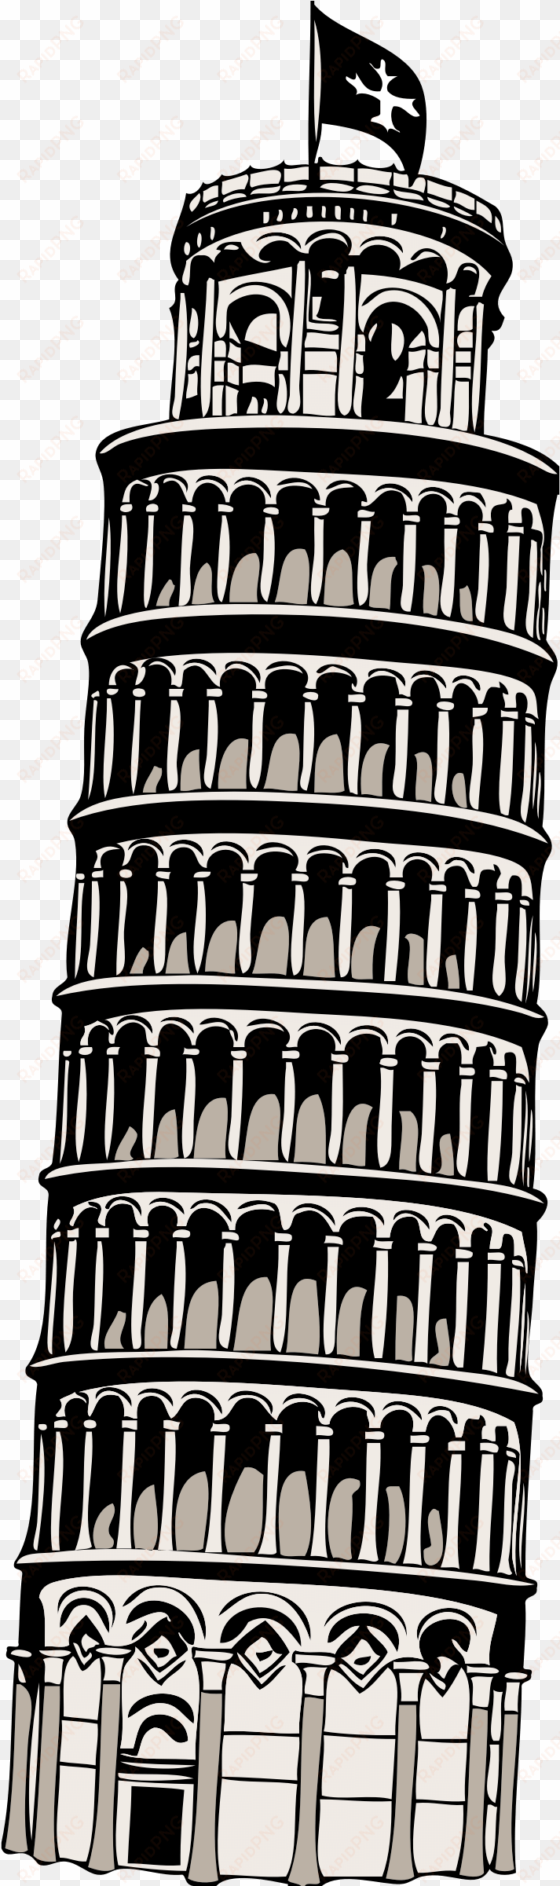 1 - leaning tower of pisa pdf